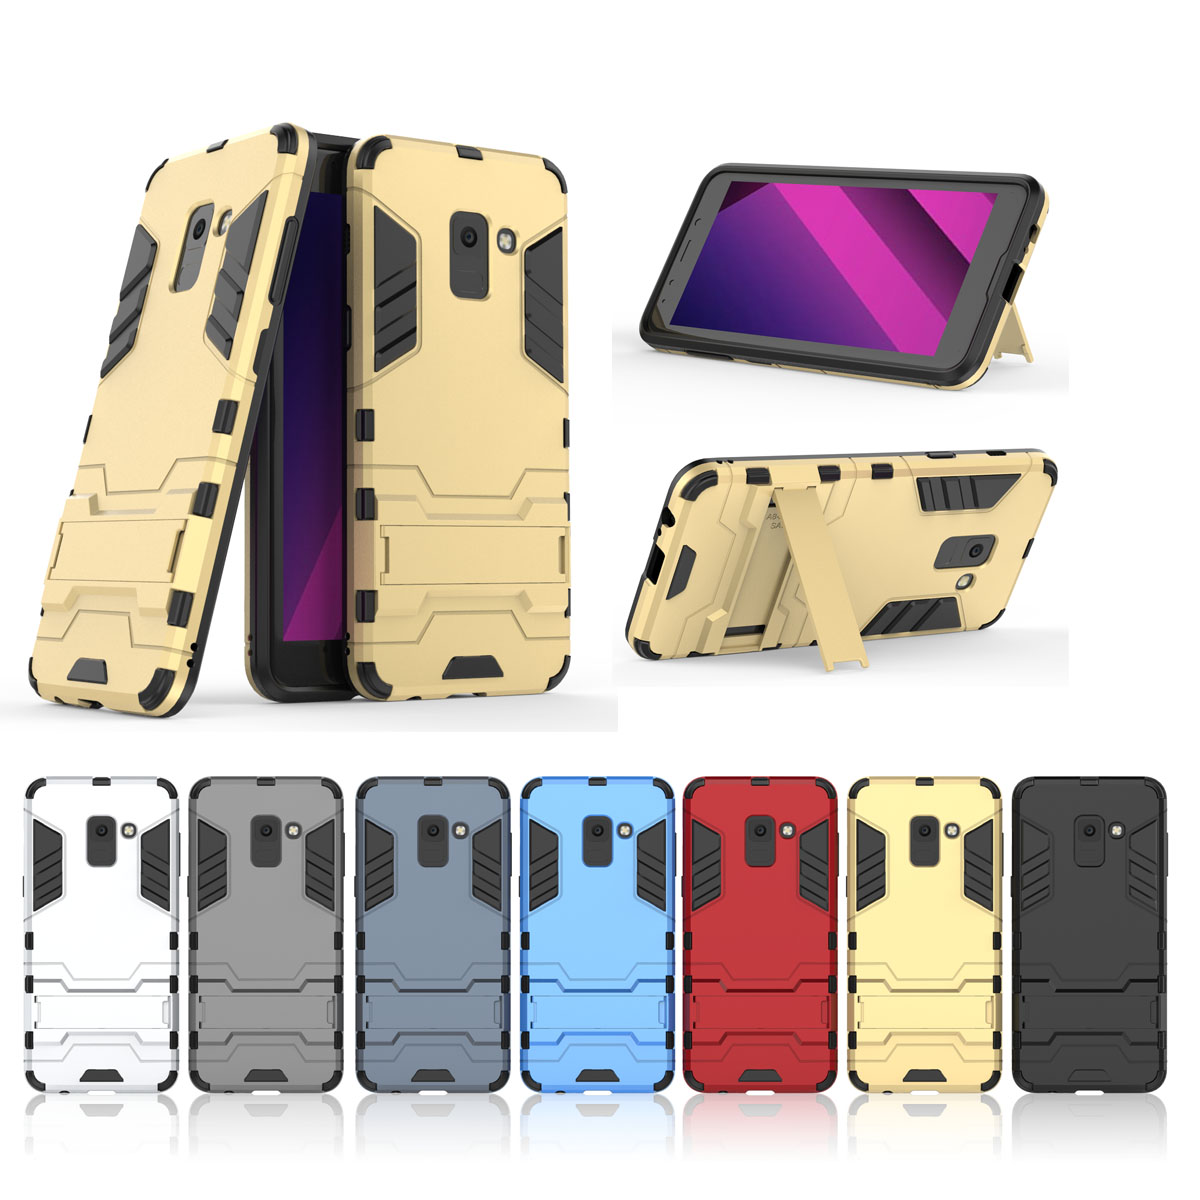 Bakeey-2-in-1-Armor-Kickstand-Hard-PC-Protective-Case-for-Samsung-Galaxy-A8-Plus-2018-1297009